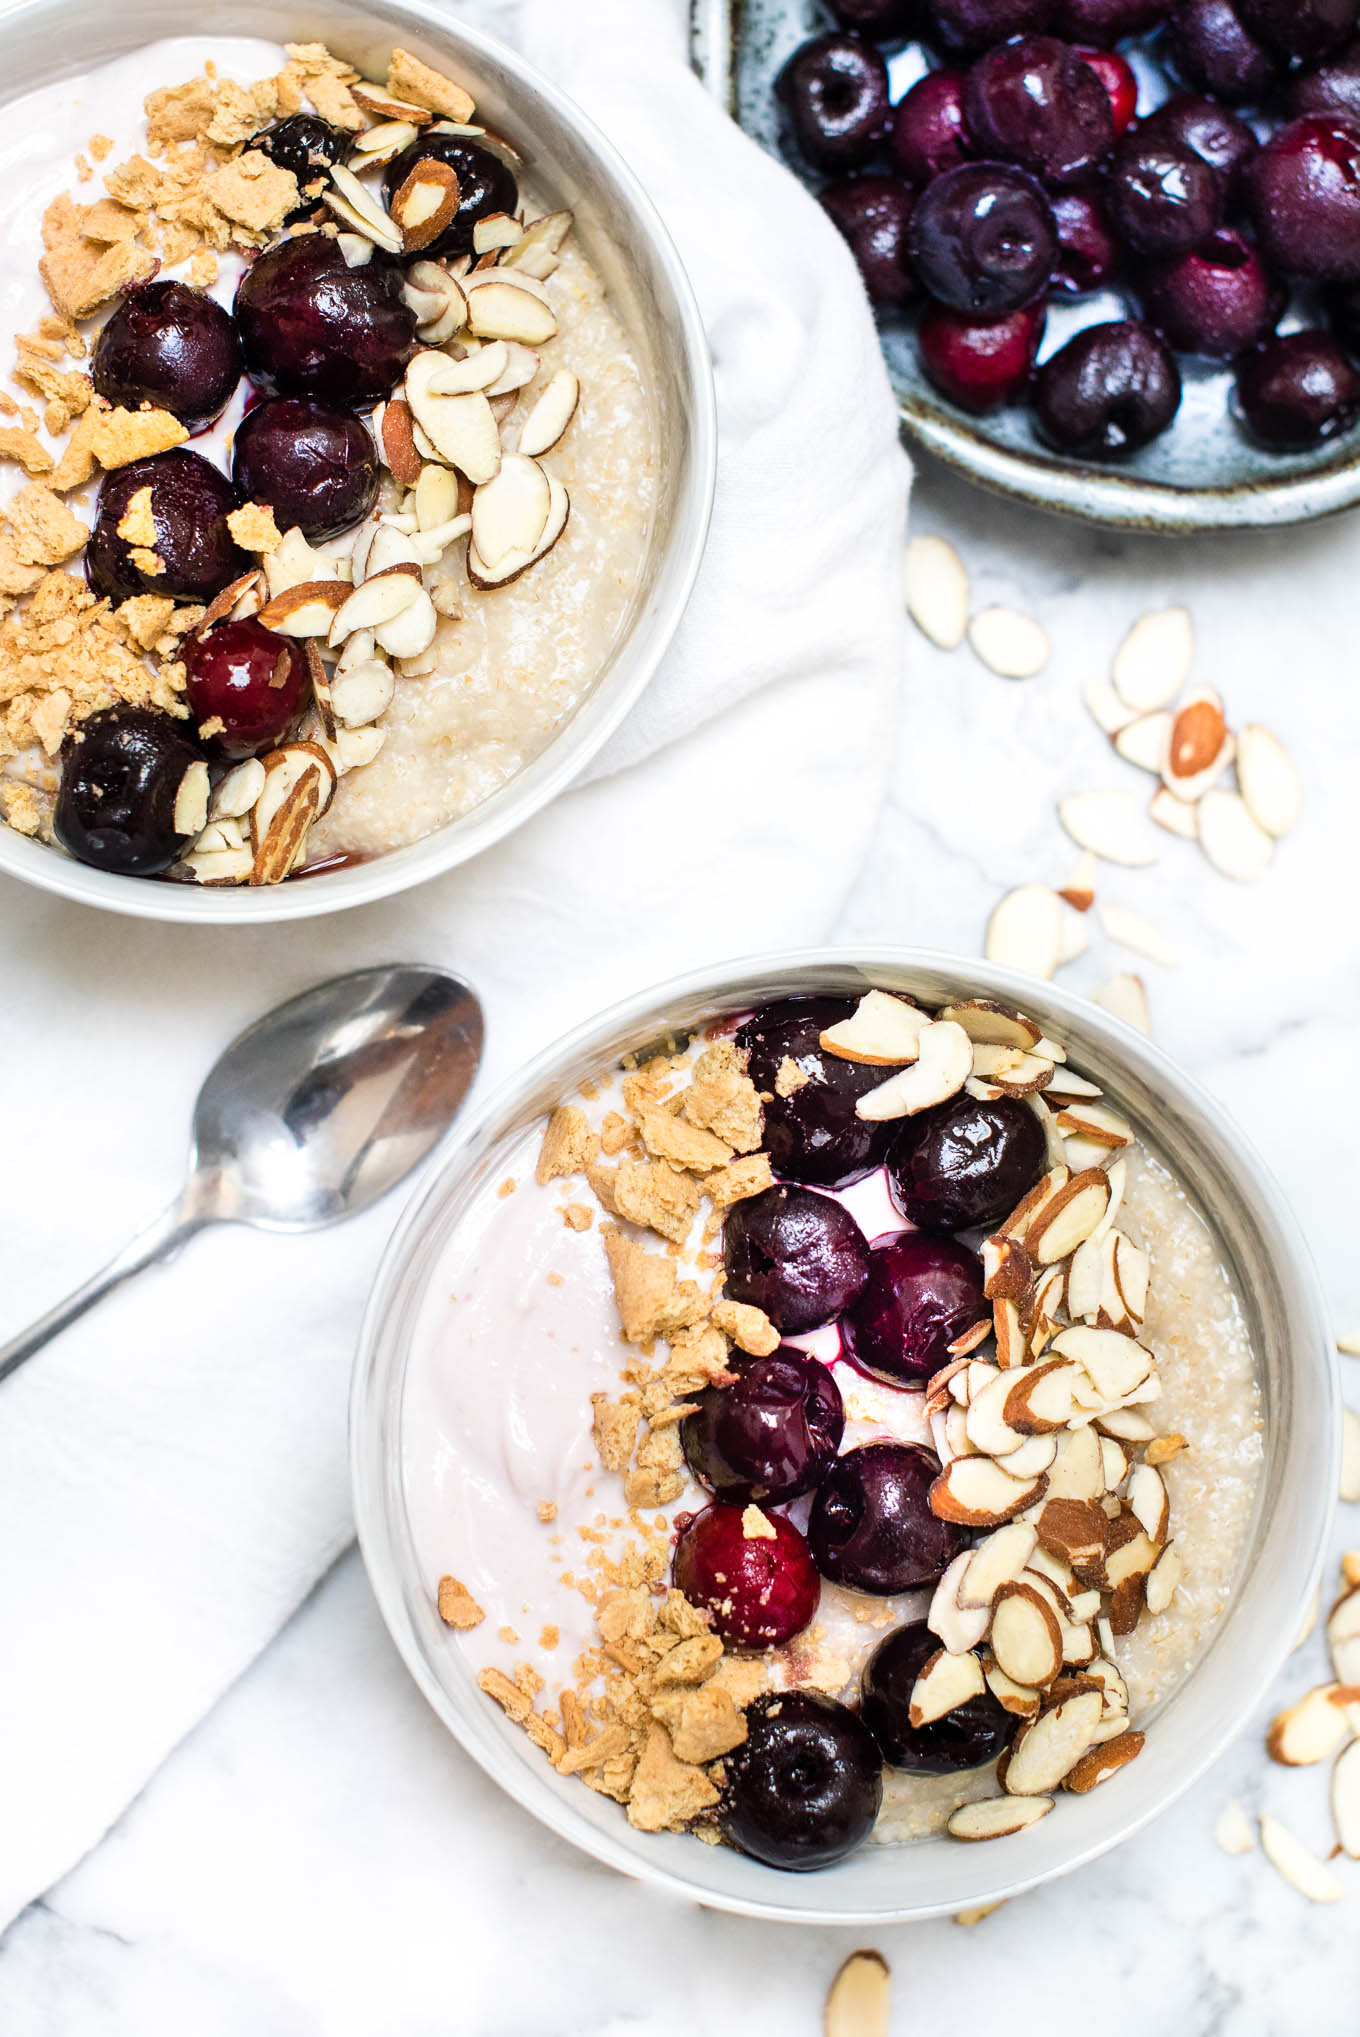 Cherry Almond Cheesecake Oat Bran Bowl is a tasty and quick fix breakfast that is high in protein and fiber, making you you feel fuller longer.